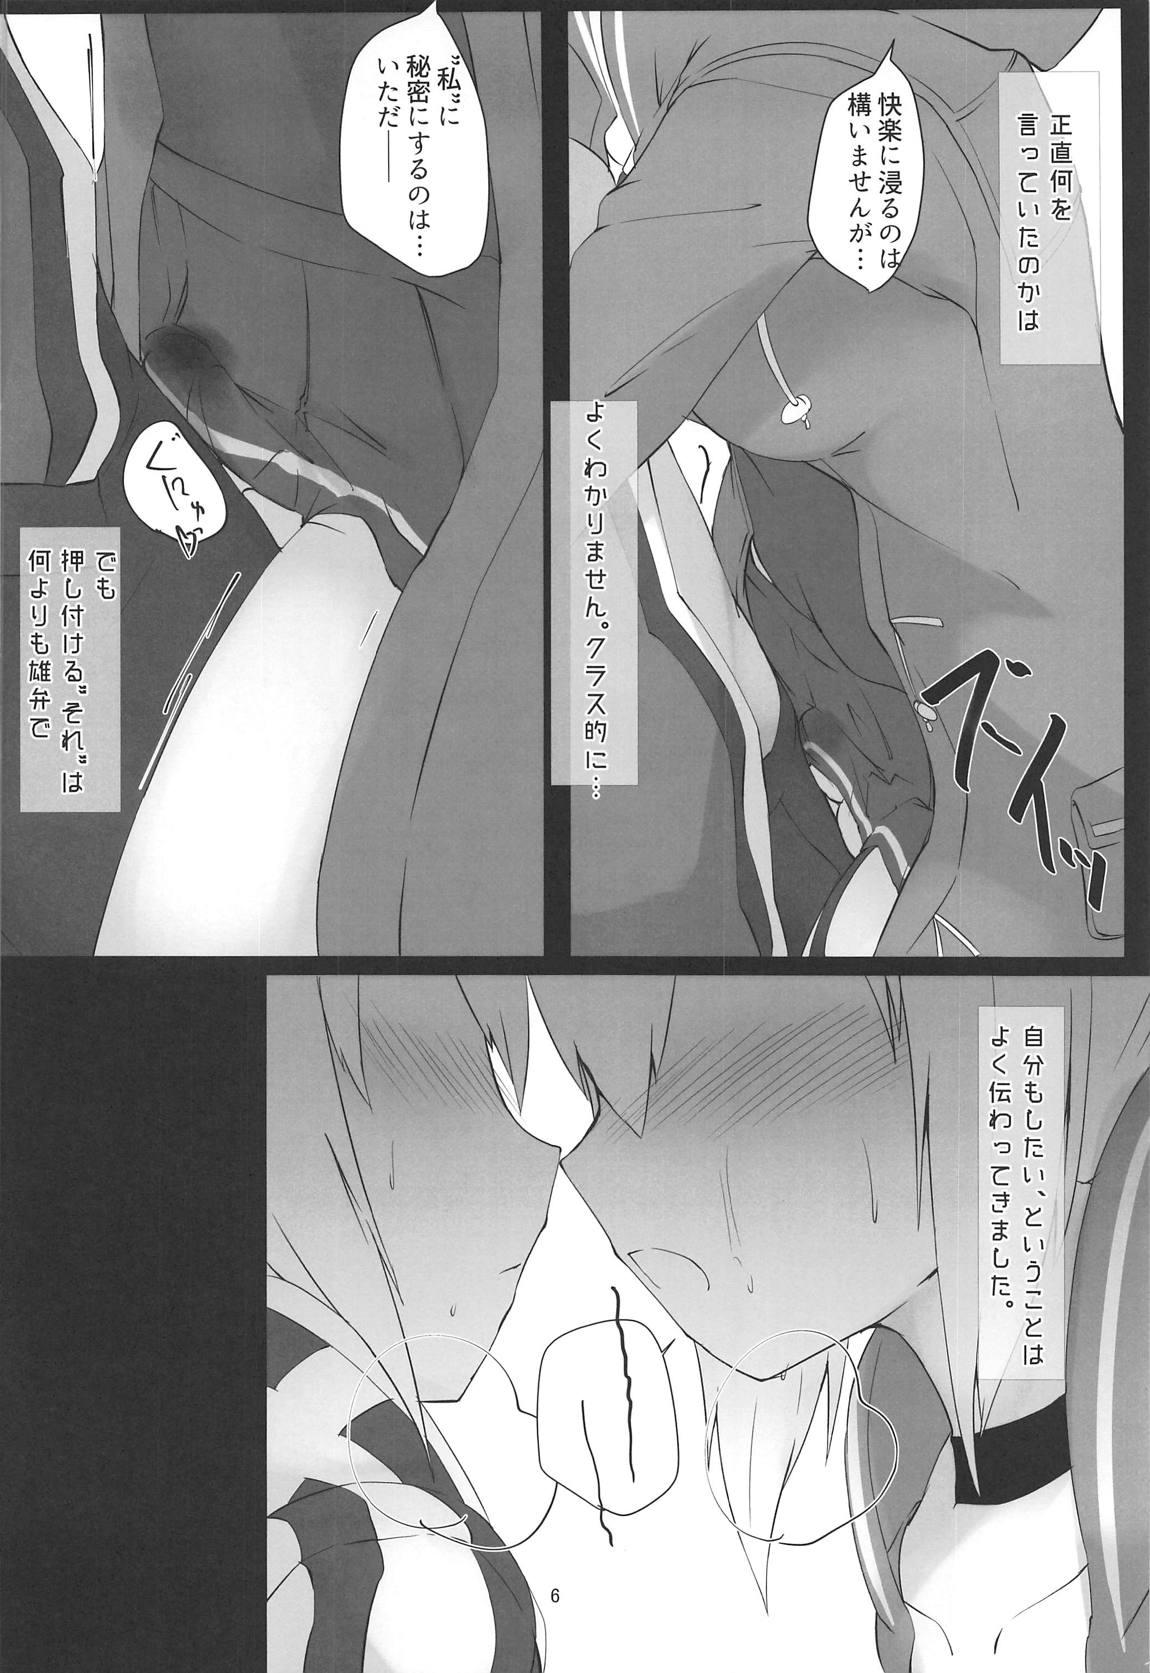 Maid eXXpose herself+ - Fate grand order China - Page 5